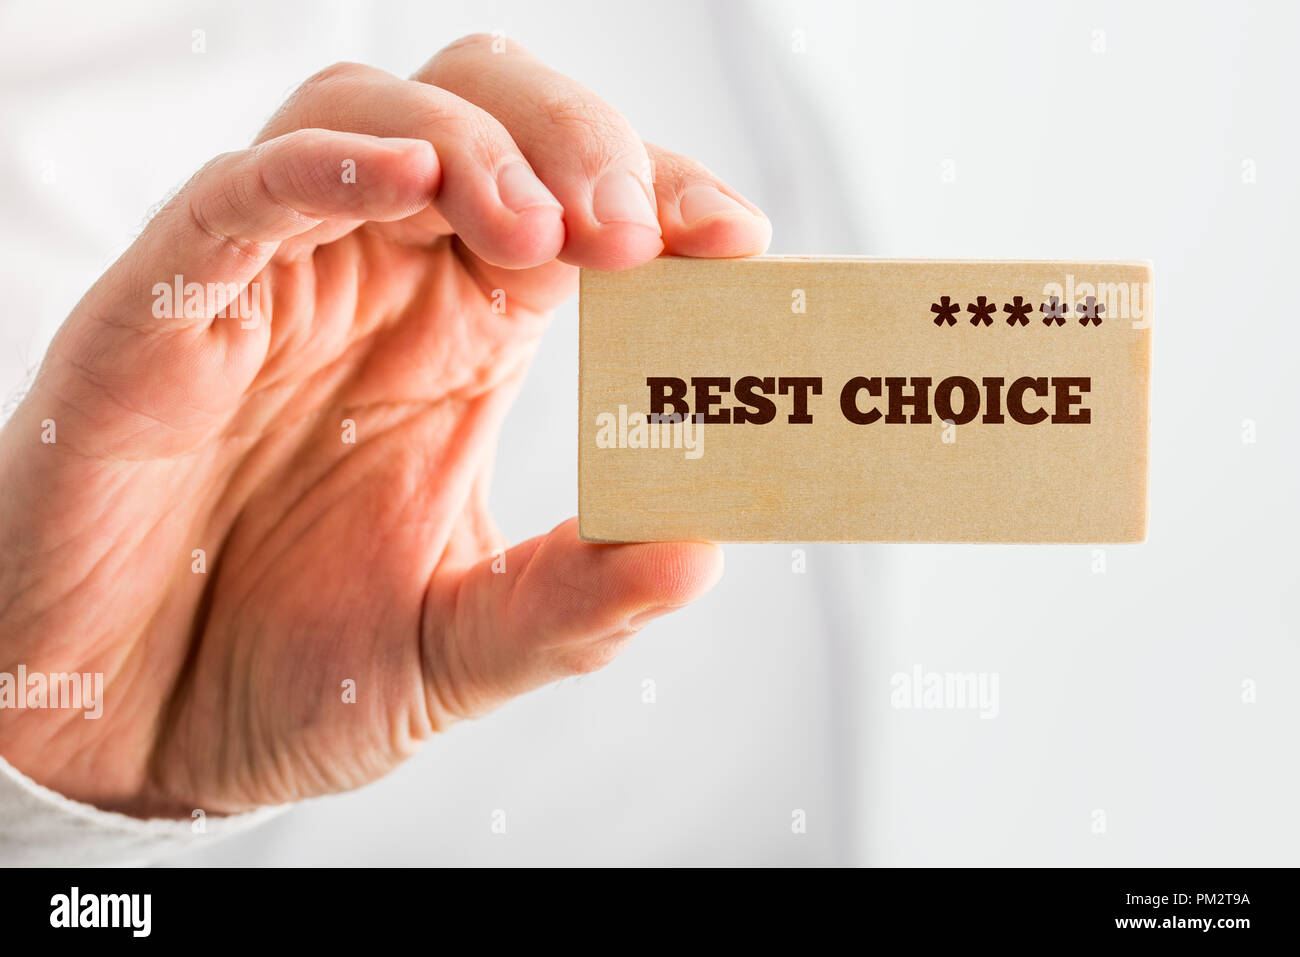 Man holding a wooden rectangle saying Best Choice with a line of five stars depicting good value, 5-star quality and popularity ranking. Stock Photo